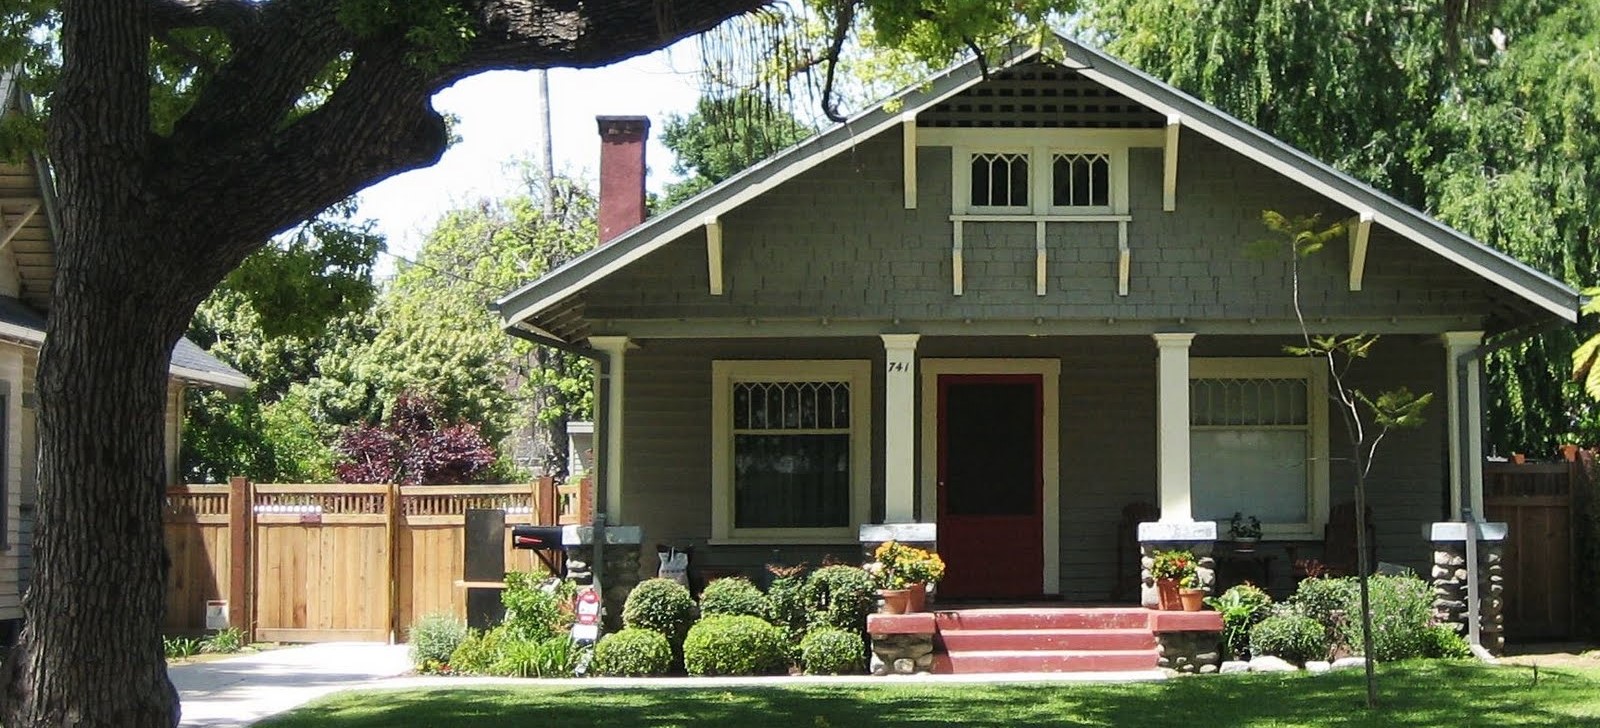 6 Reasons to Invest in Single-Family Homes